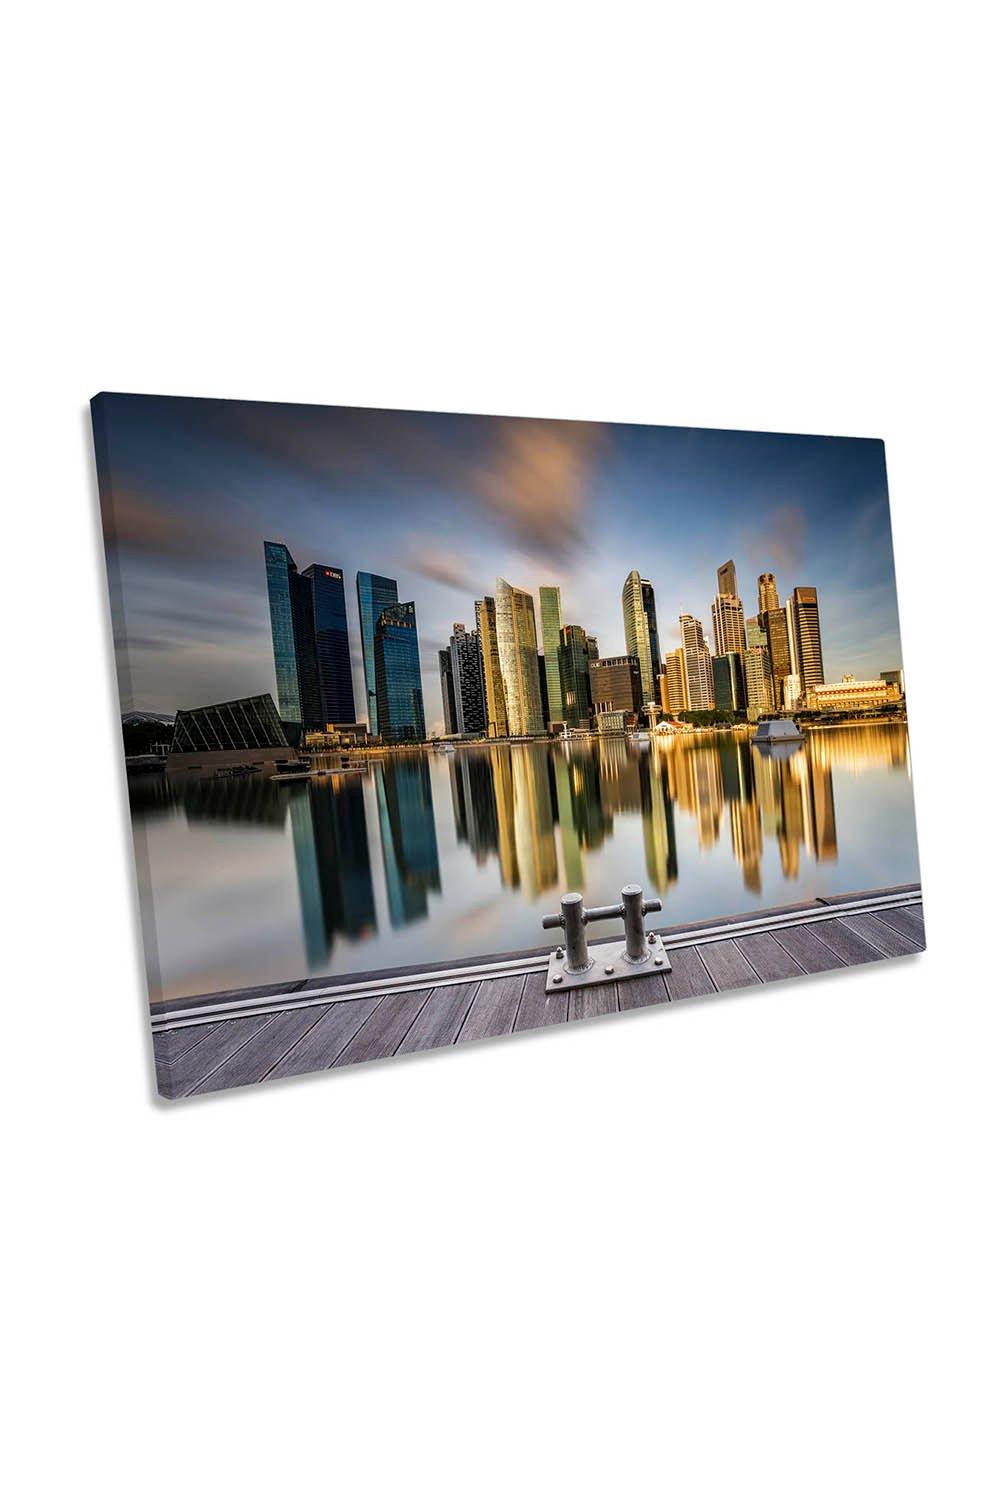 Singapore City Skyline Reflection Canvas Wall Art Picture Print